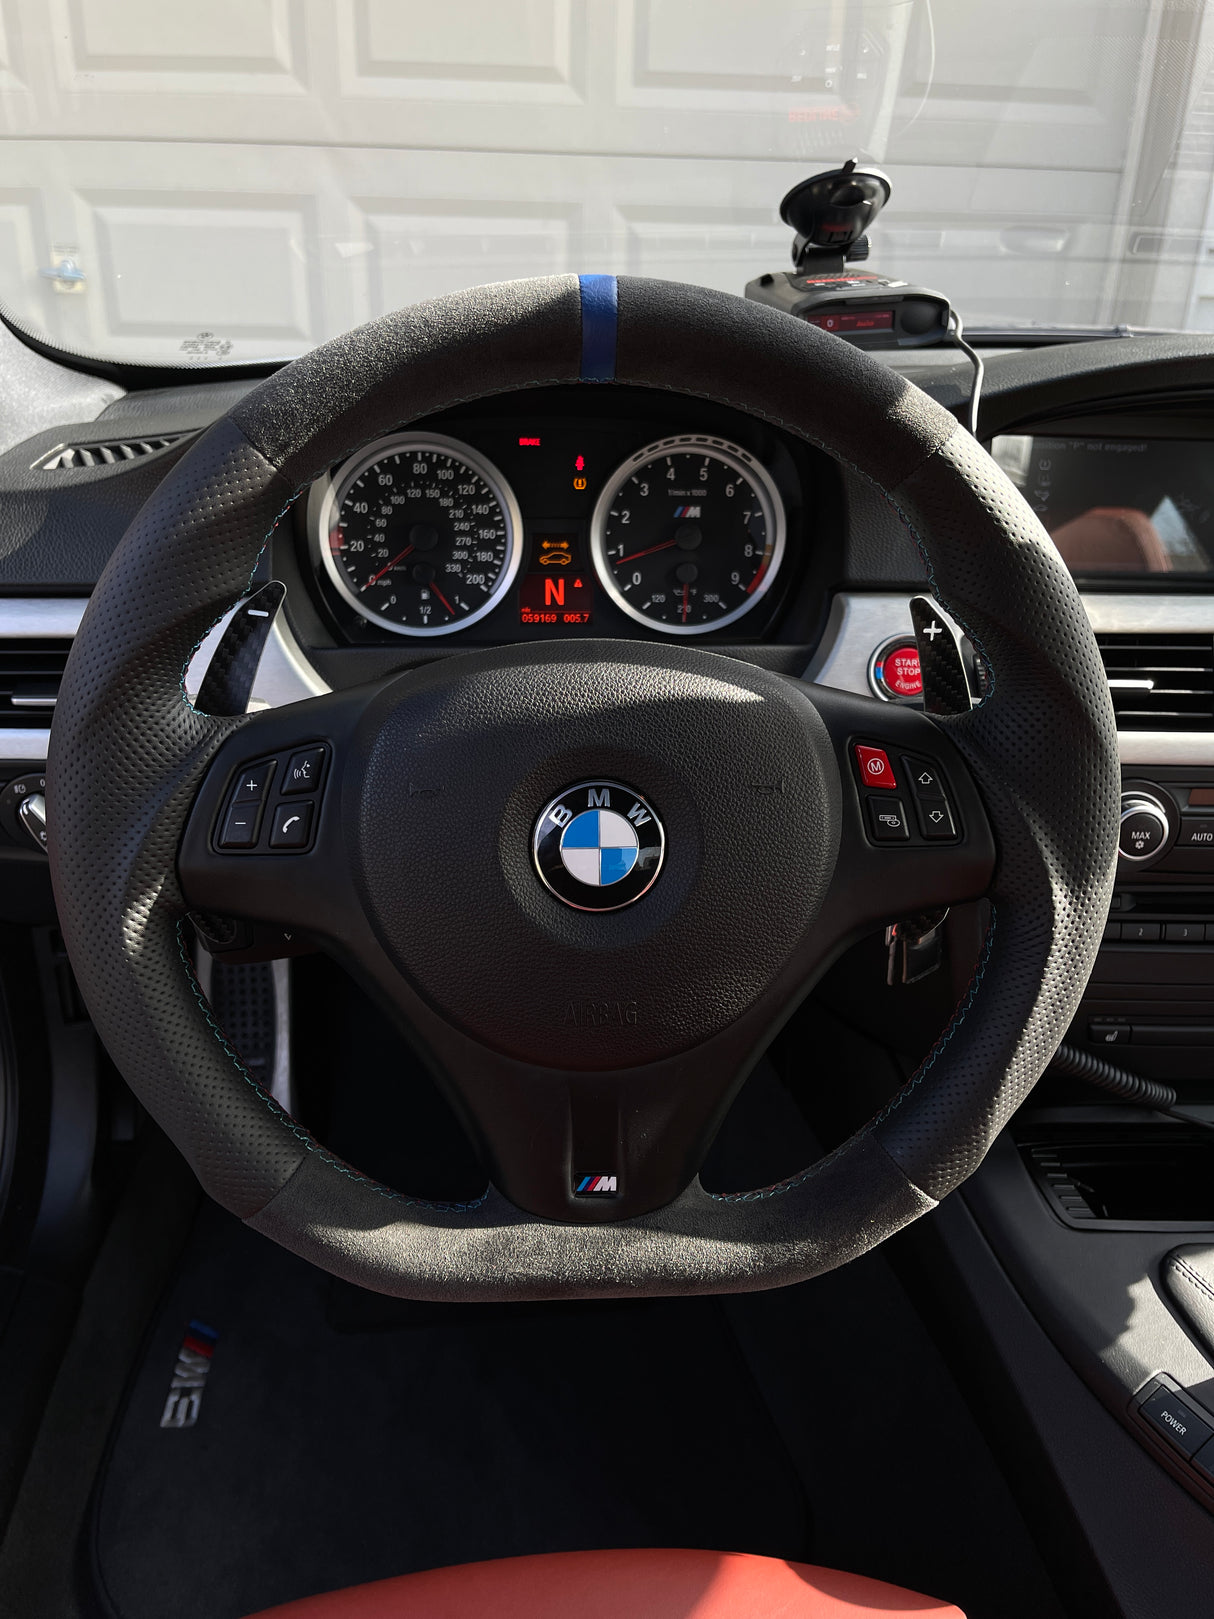 Magnetic Paddle Shifters - BMW E9X M3